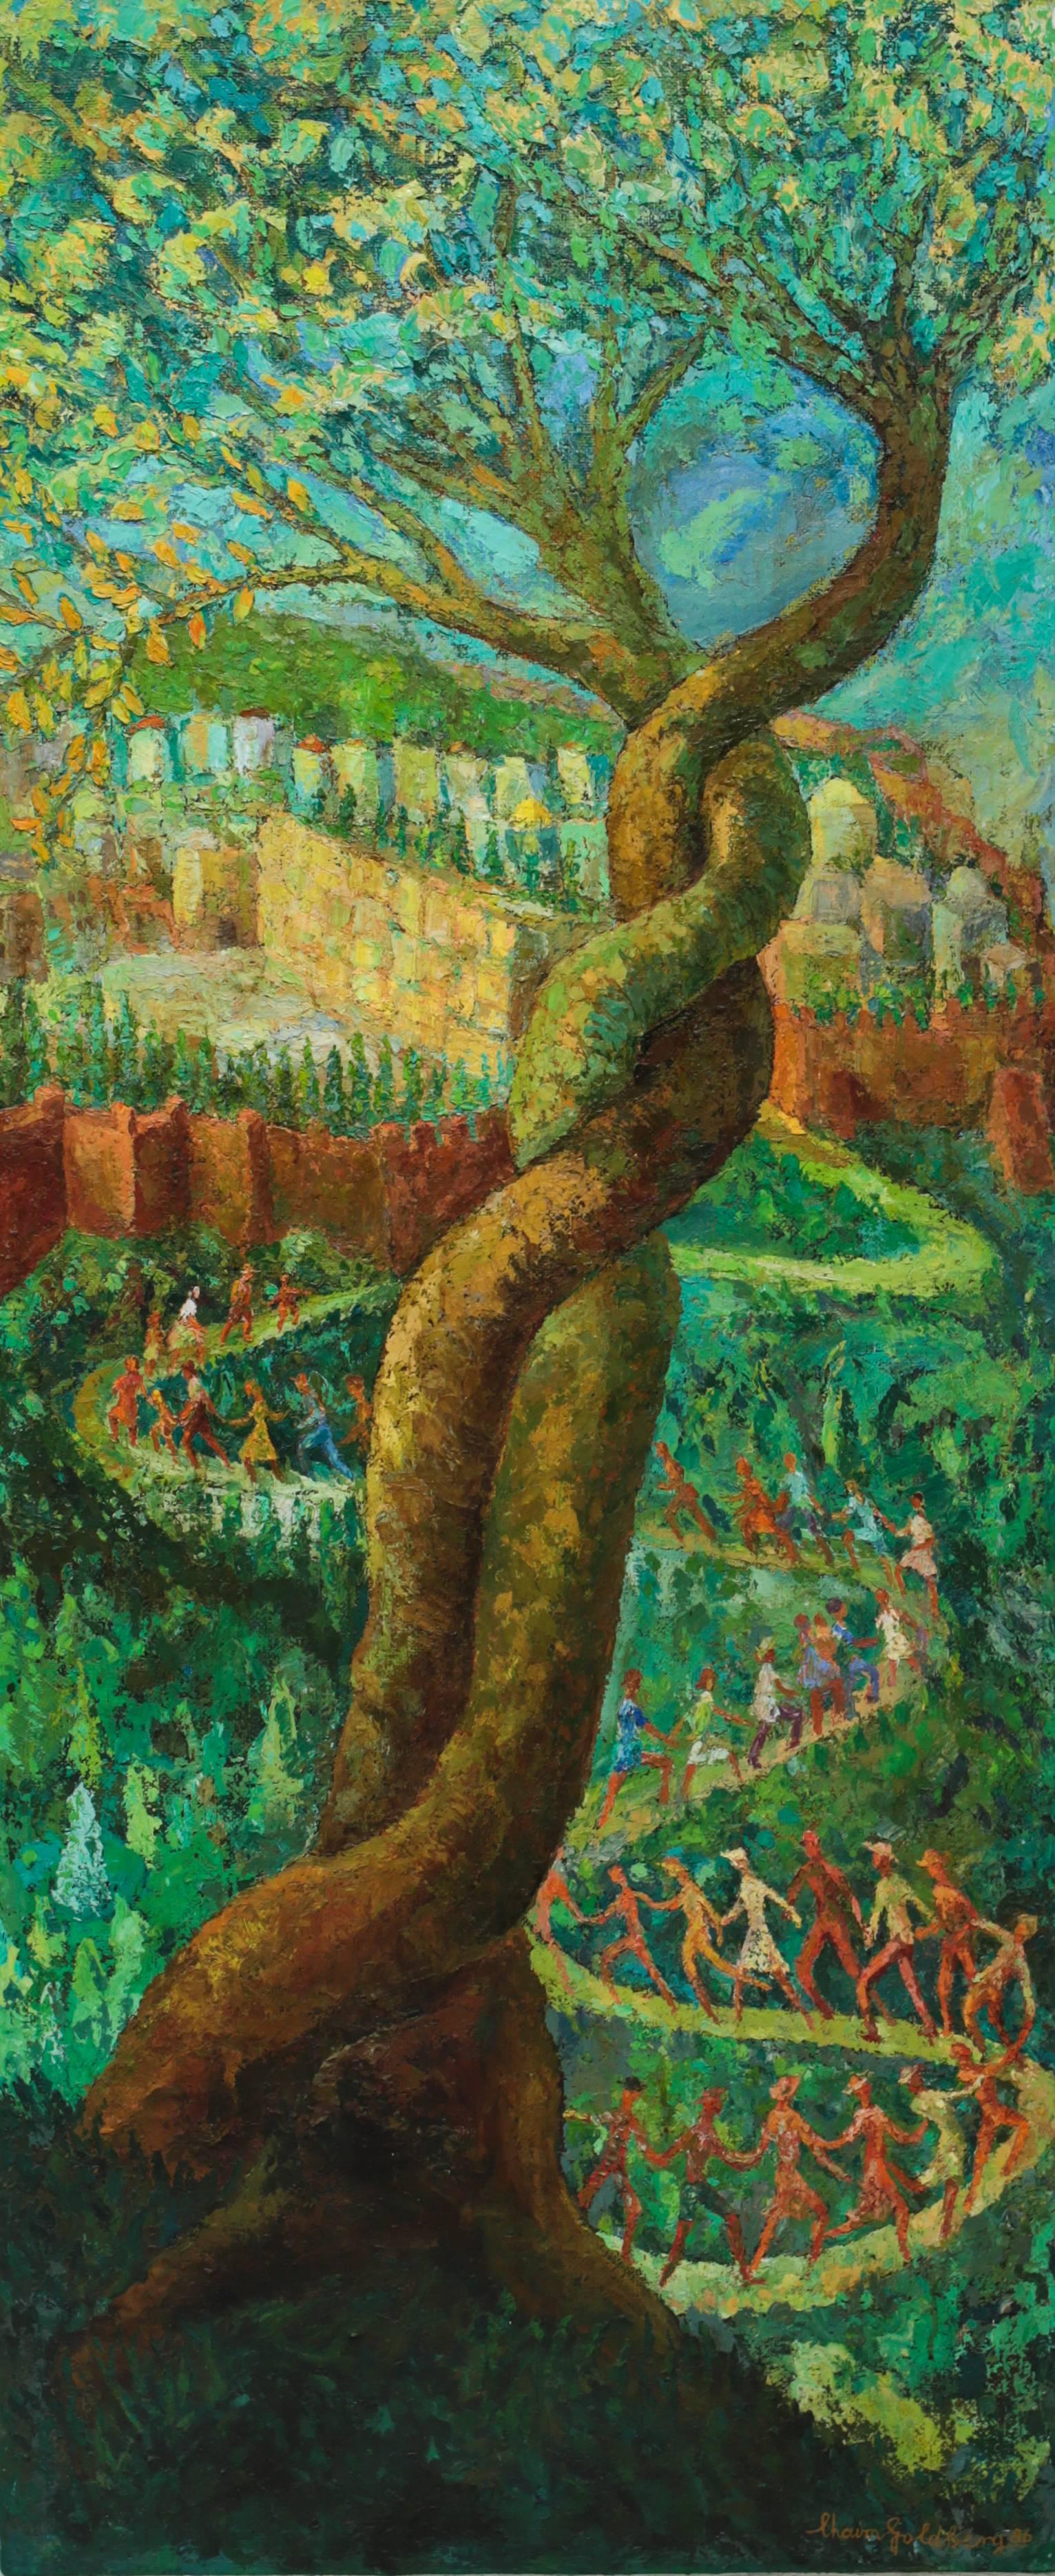 A large oil on wood panel painting by Polish artist Chaim Goldberg. A large and vibrant tree flourishes in the foreground with a stream of colorful people holding hands as they seemingly dance their way down a winding path leading to the Waling Wall